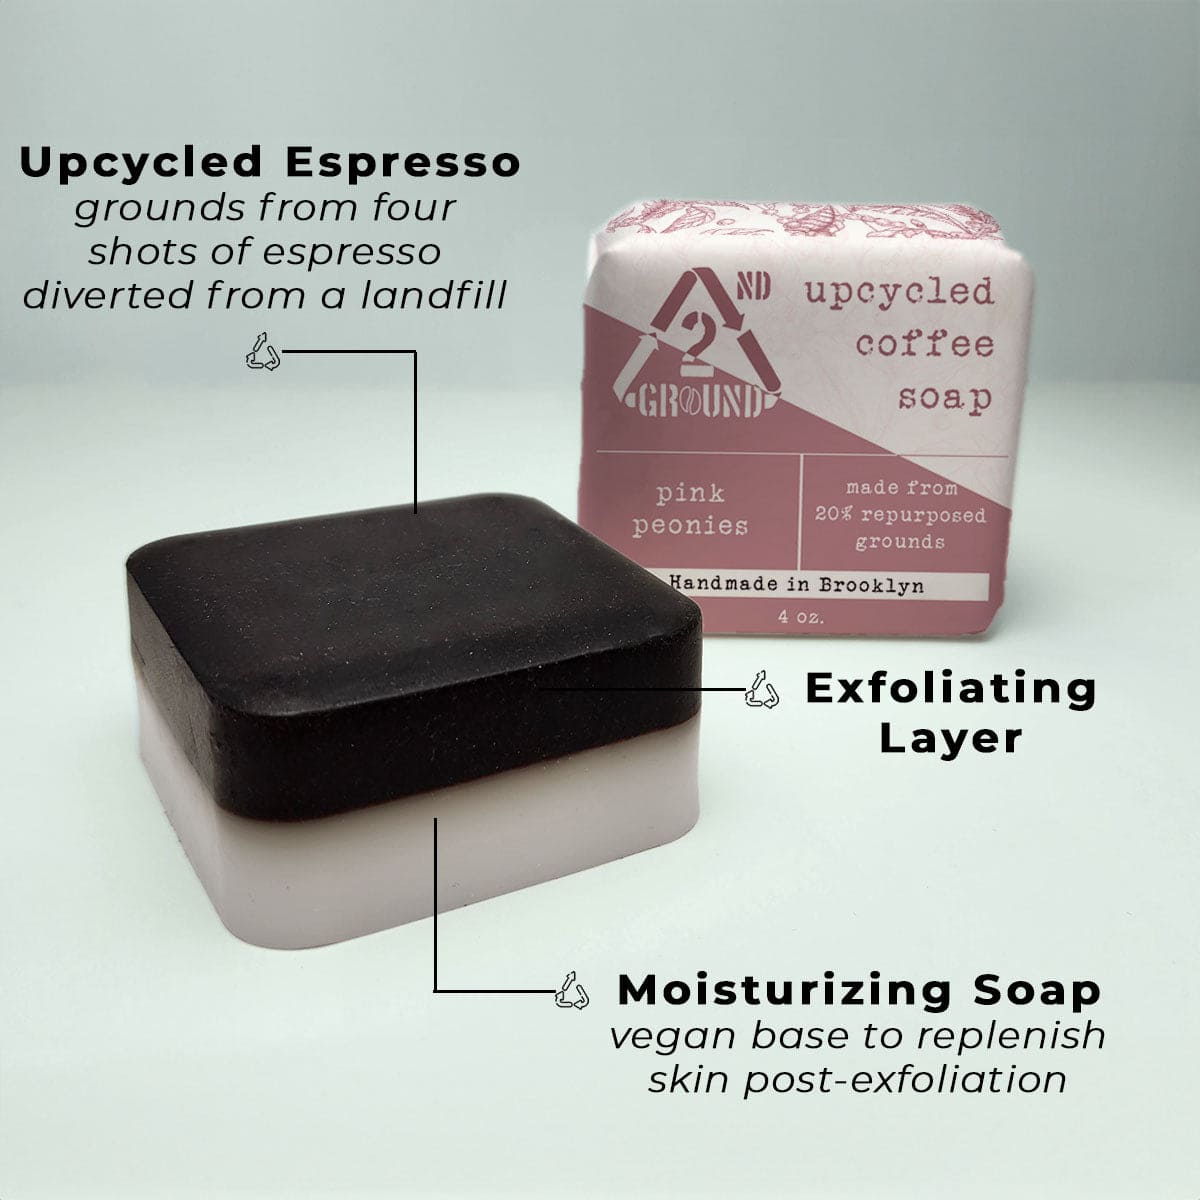 Benefits of peonies upcycled coffee soap